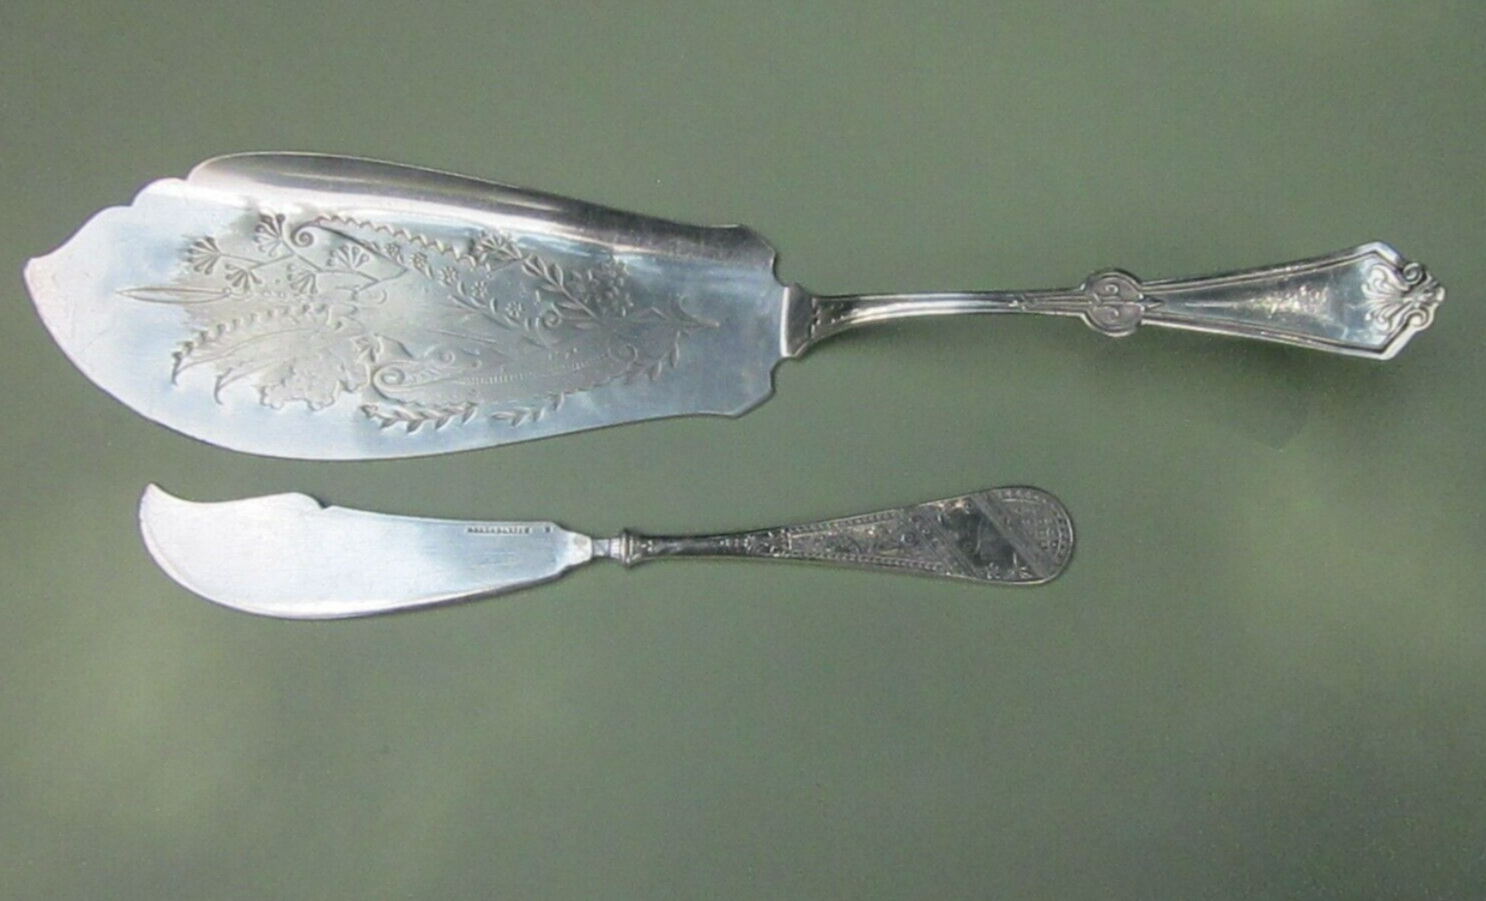 Antique/Collectible Aesthetic Movement Silverplate Fish Server & a Fruit Knife